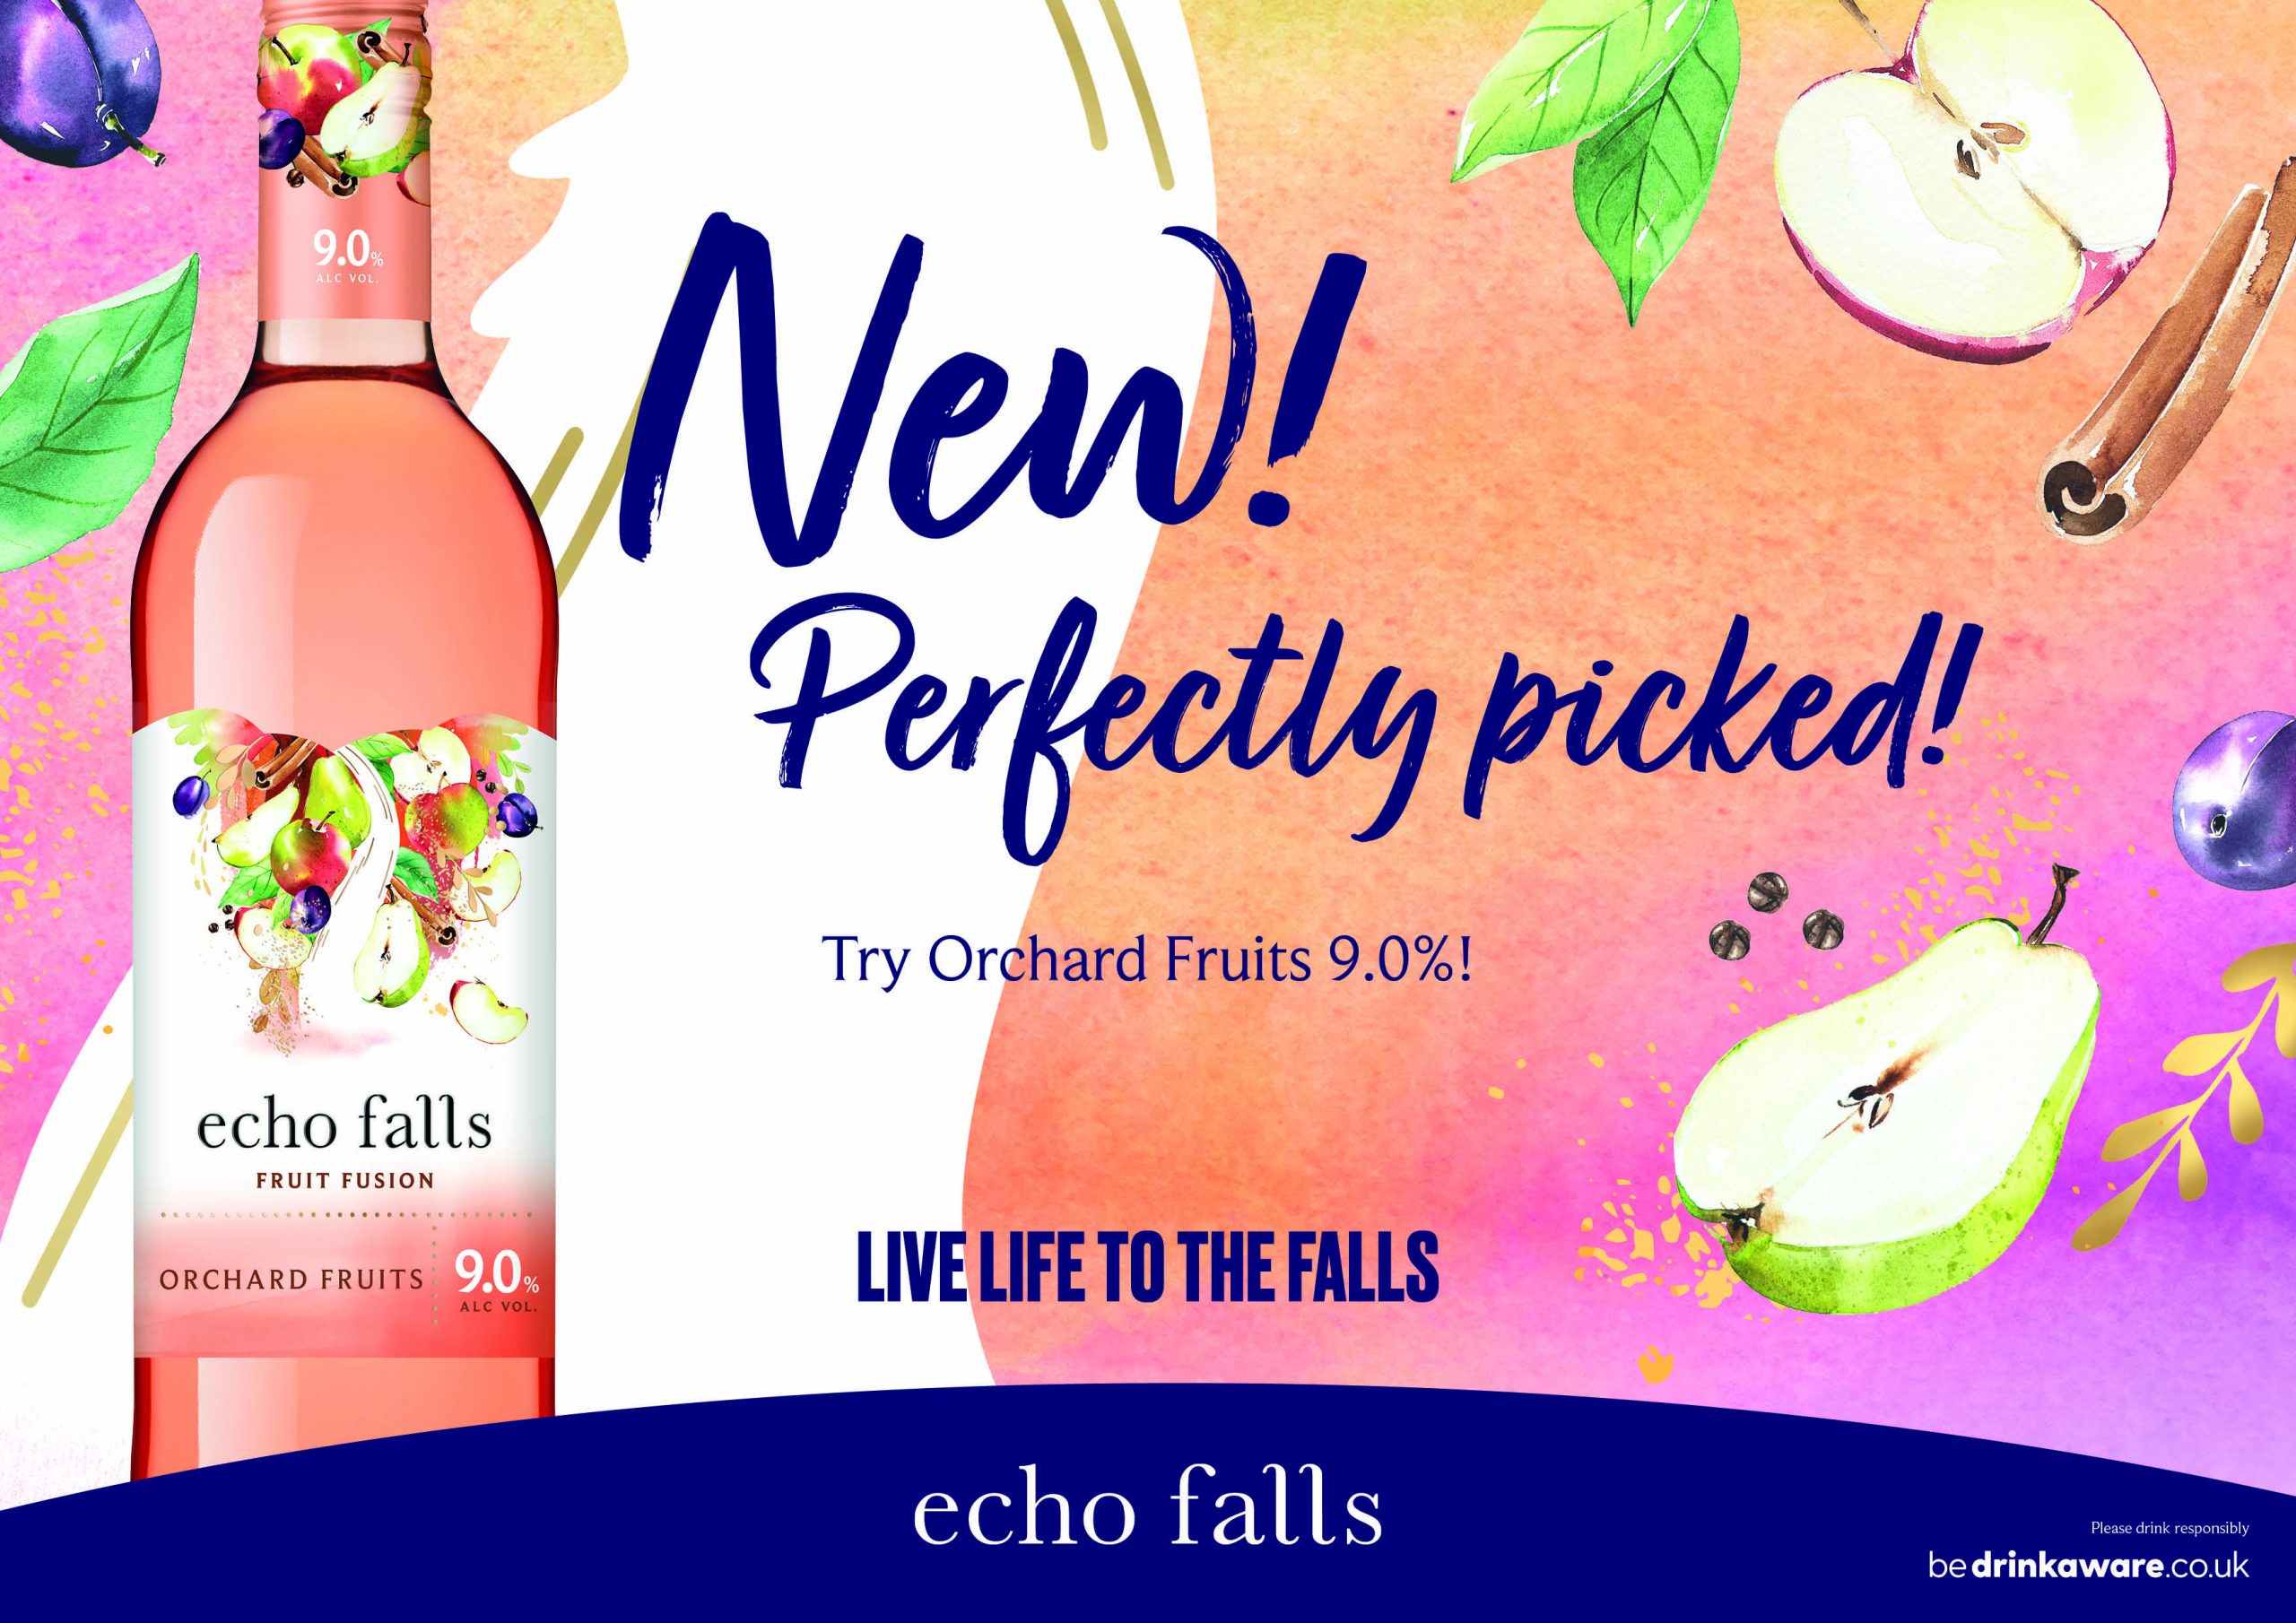 Echo Falls unveils new Orchard Fruits flavour